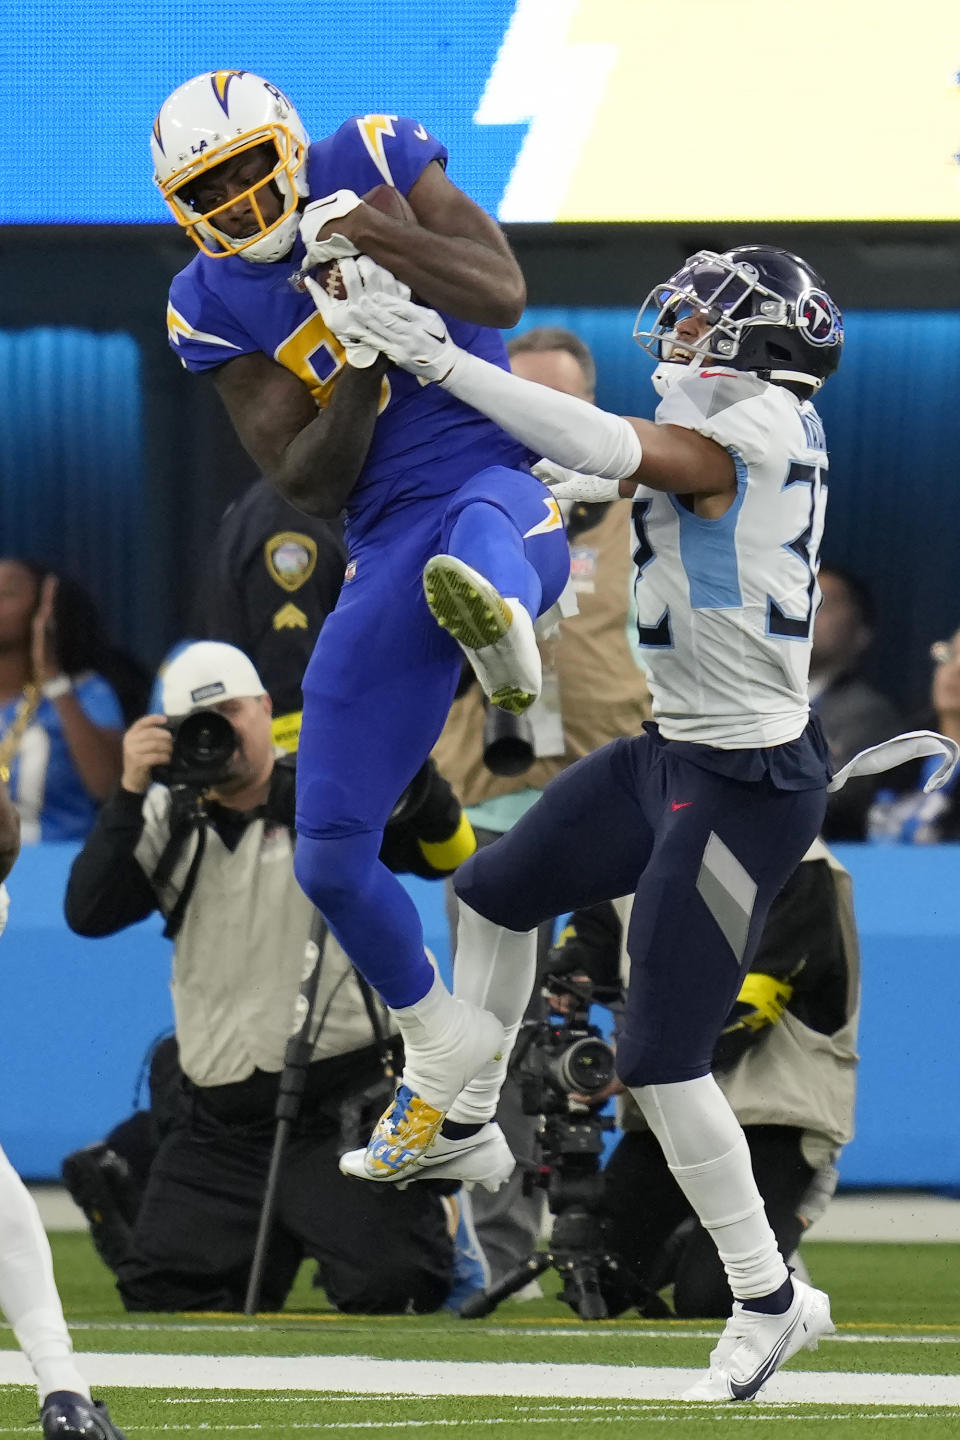 Los Angeles Chargers wide receiver Mike Williams (81) catches a pass in front of Tennessee Titans cornerback Greg Mabin during the second half of an NFL football game in Inglewood, Calif., Sunday, Dec. 18, 2022. (AP Photo/Ashley Landis)